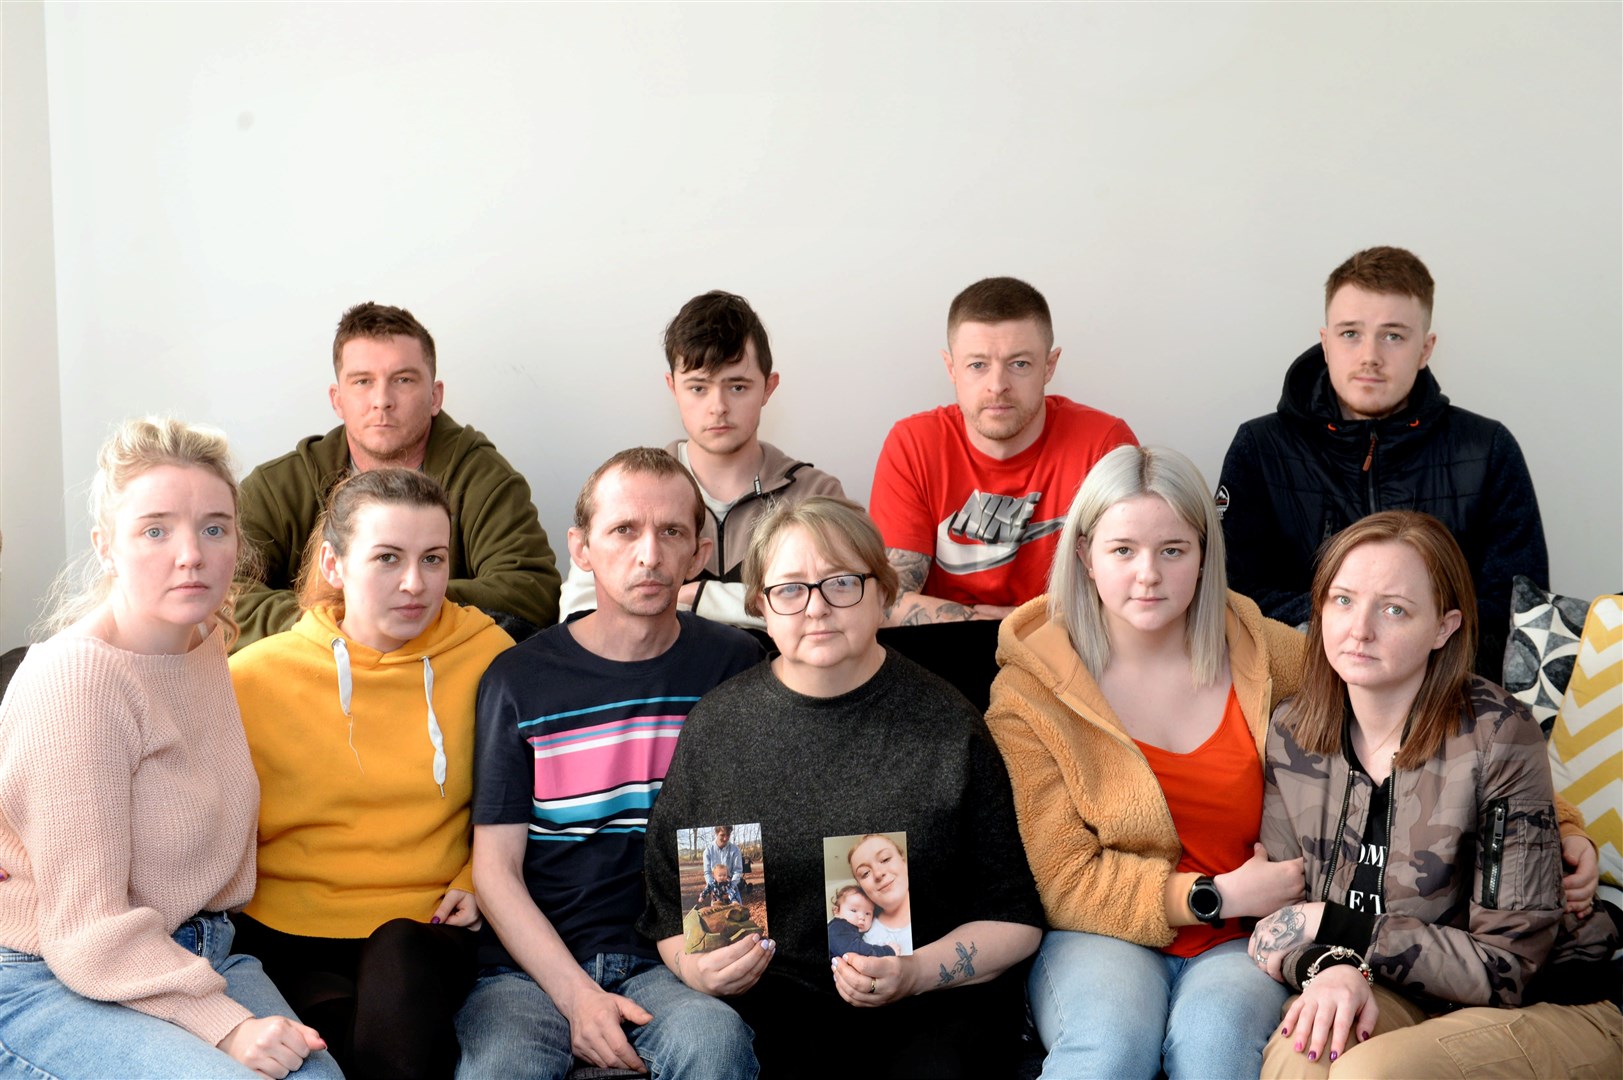 Mum Samantha Cousin (front, centre) with relatives (back row, from left) Jamie King, Jack Fyall, Michael Walsh and Sam Evans and (front row, from left) Natasha Seel, Victoria Tennant, Rob Tennant, Vikki Fyall and Jamie Lee King.